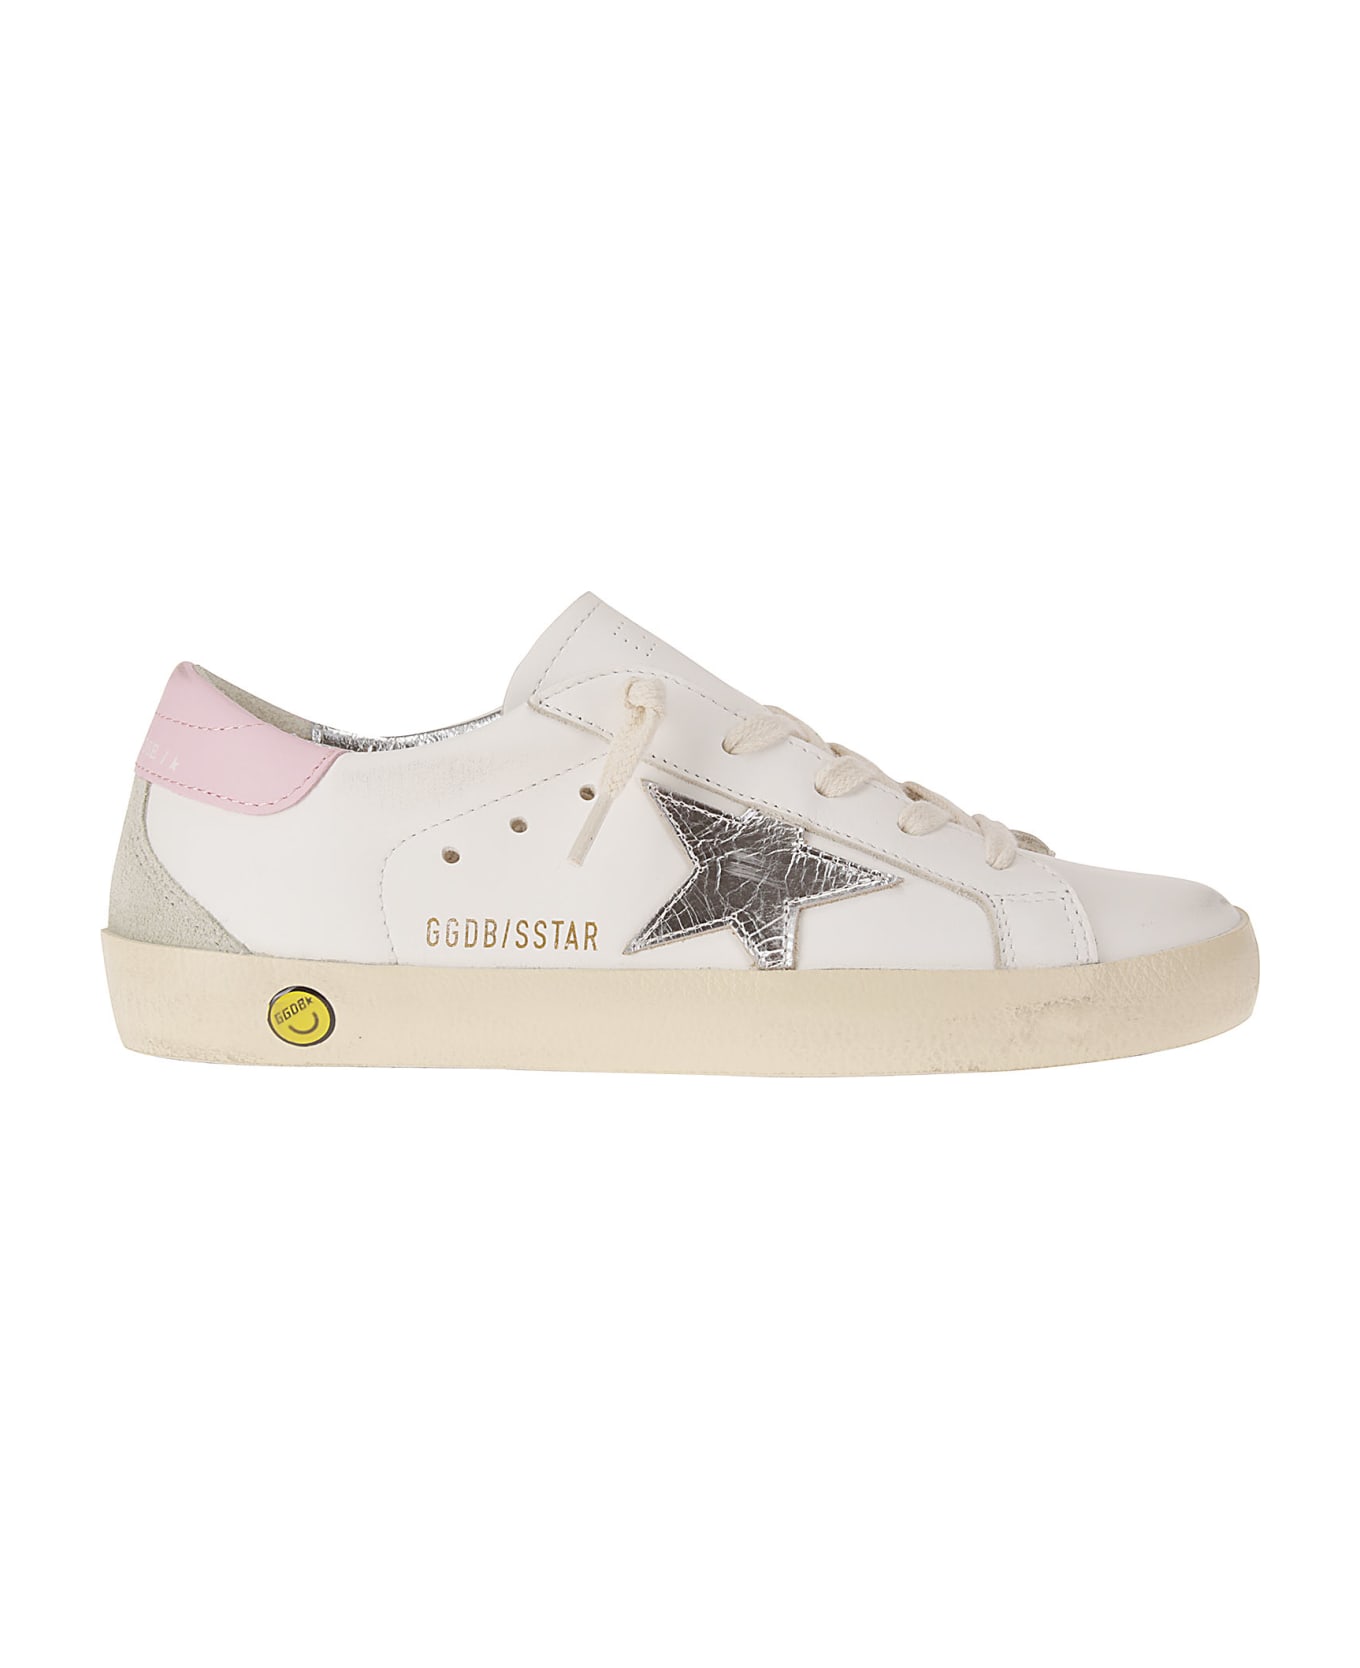 Golden Goose Super-star Leather Upper And Heel Laminated Sta - WHITE/SILVER/ICE/ORCHID PINK シューズ